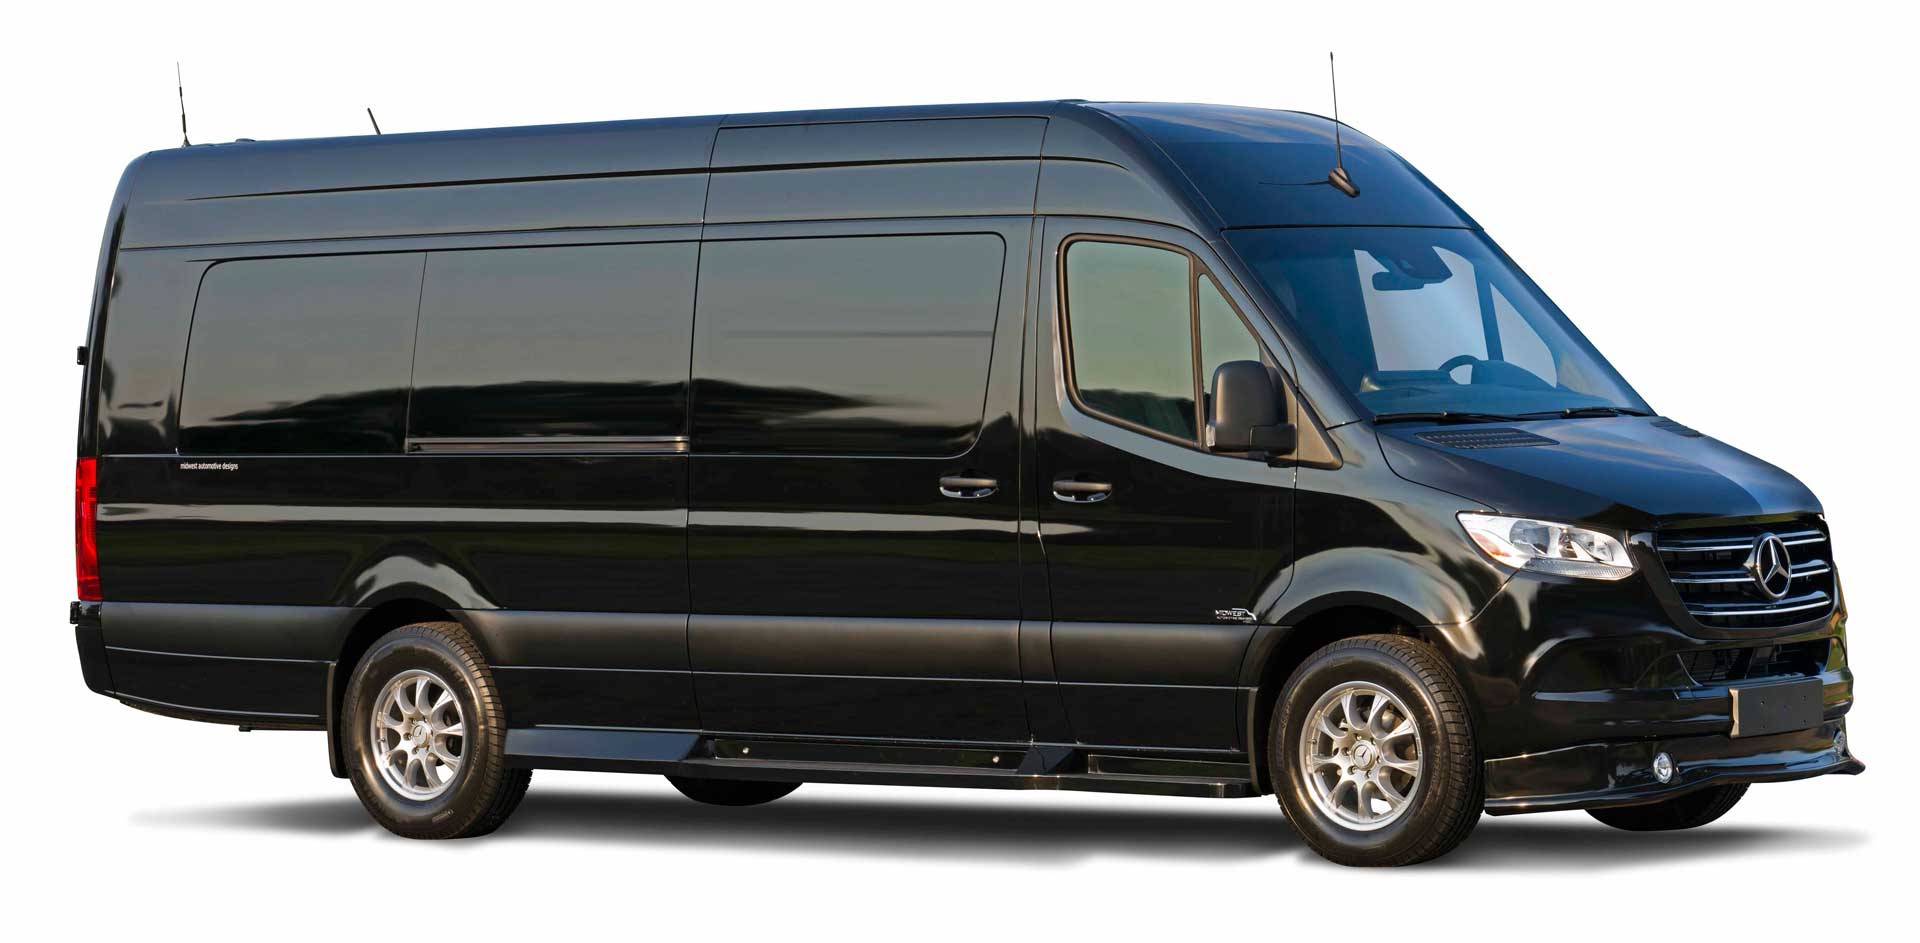 book a st moritz airport transfer with this mercedes sprinter minibus for up to 8 people